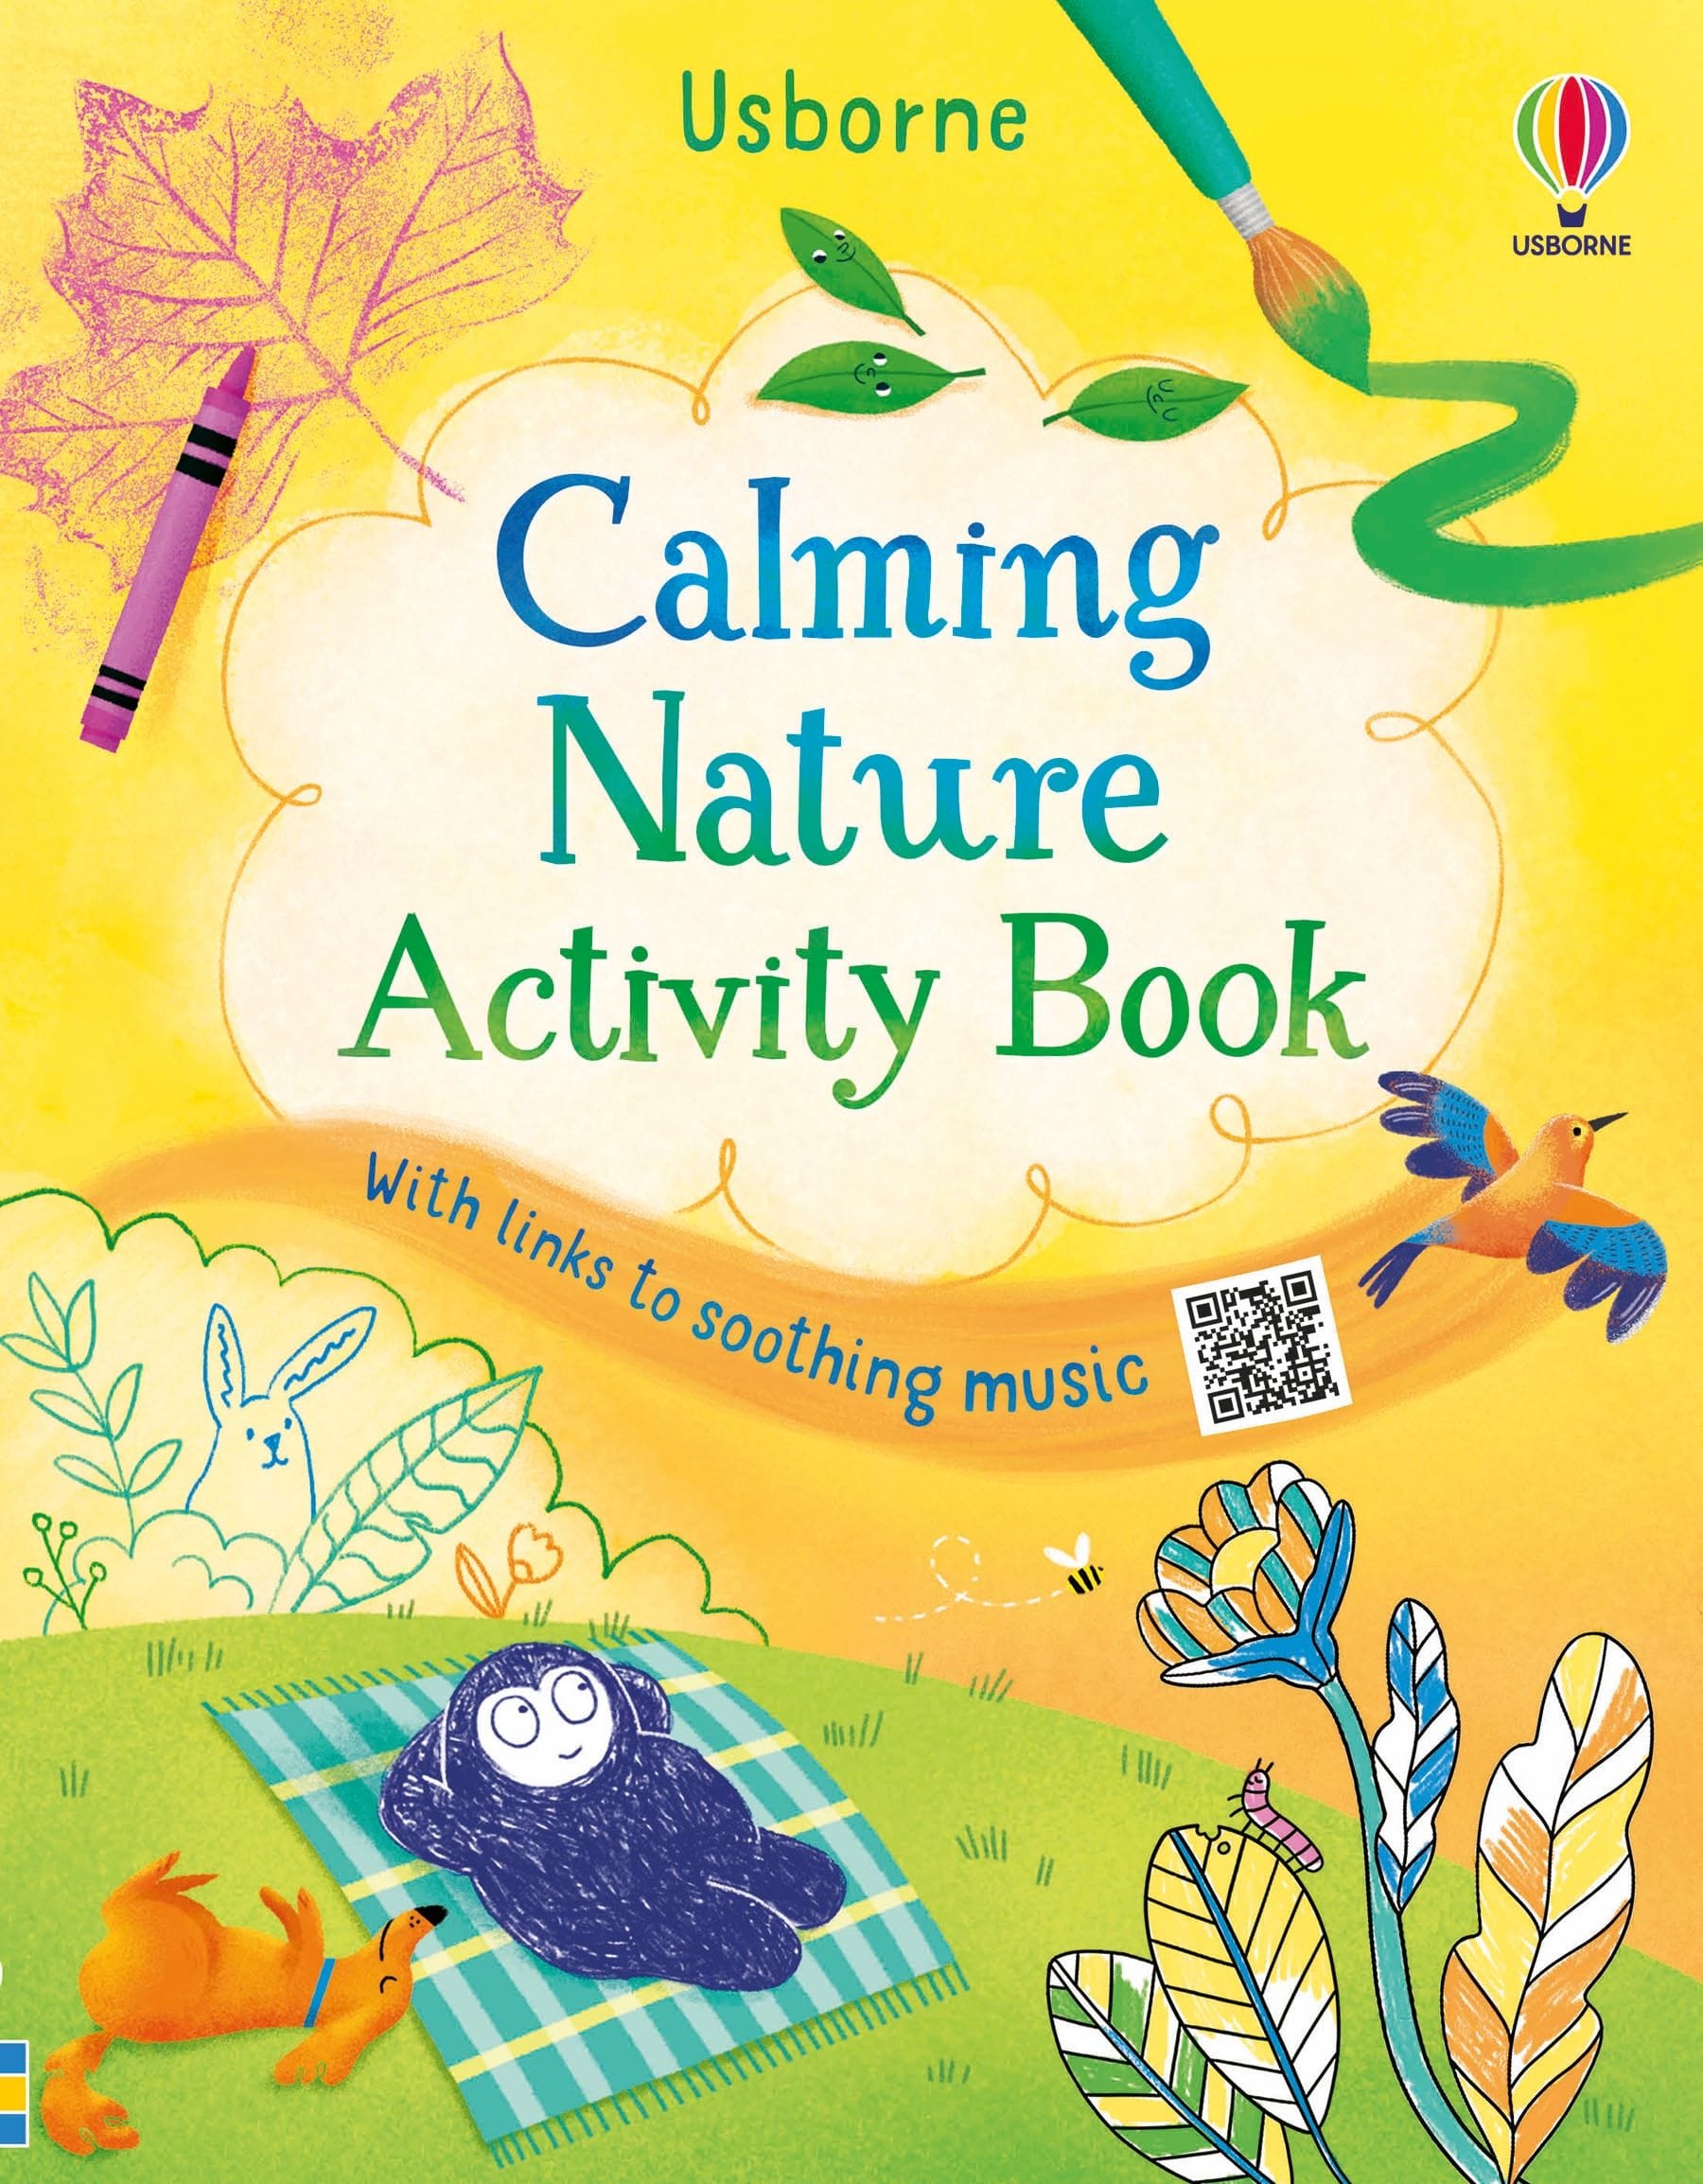 Usborne Calming Nature Activity Book Alice James, Lizzie Cope  Illustrated by Heloise Mab, Ada Crowe